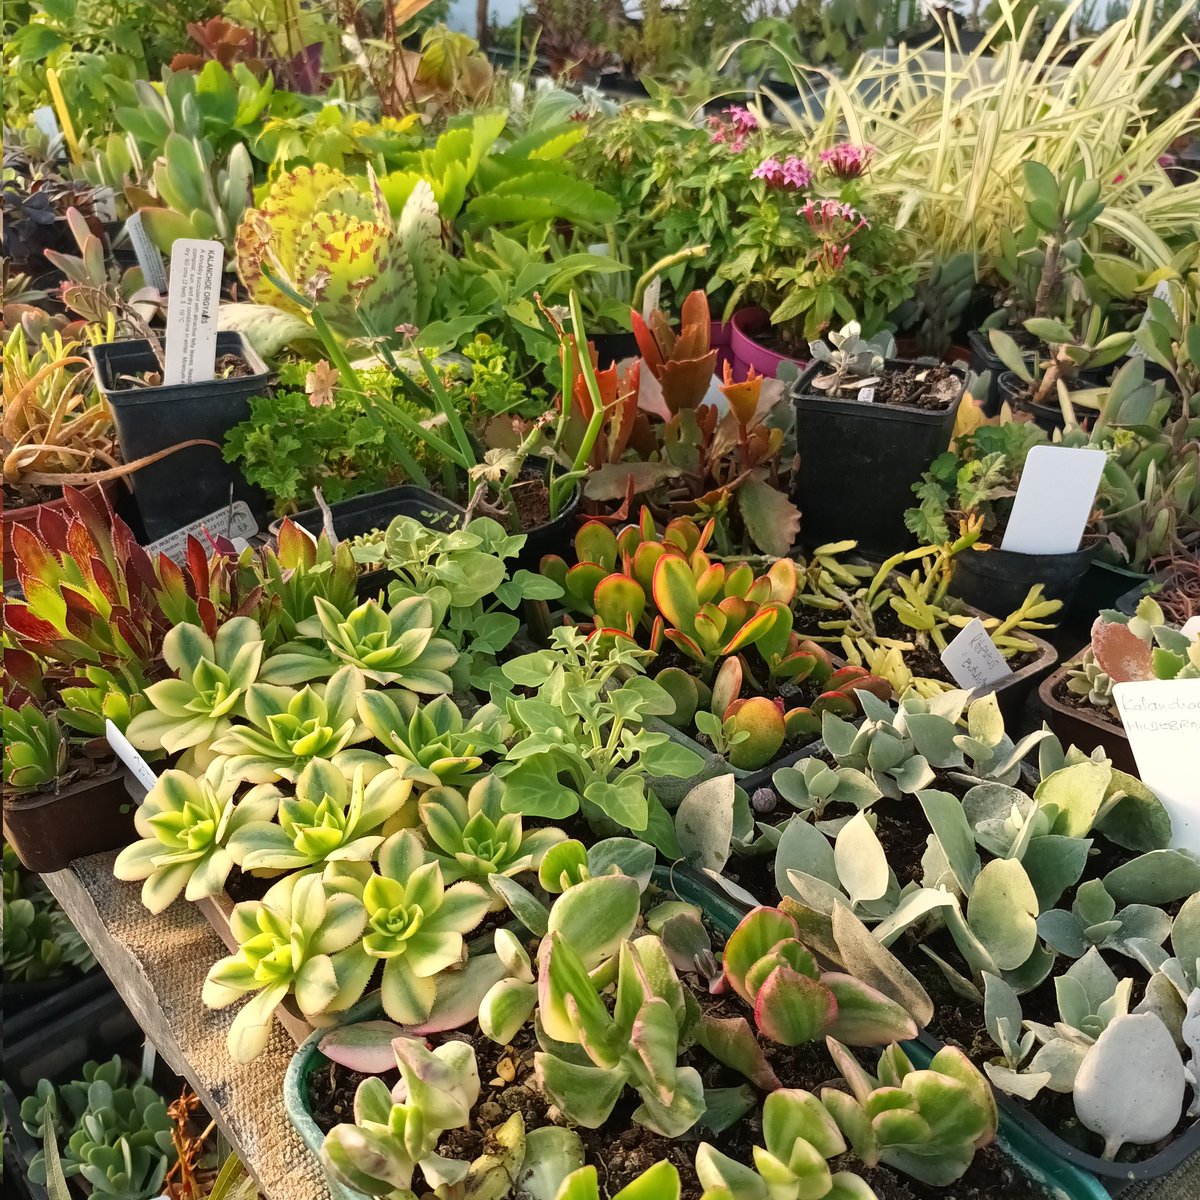 Just a few succulents I've been propagating for next year. Our new polytunnel is up so all I have to do now is fill it up 🙂
#succulents #plantnursery #propagatingplants #mailorderplants